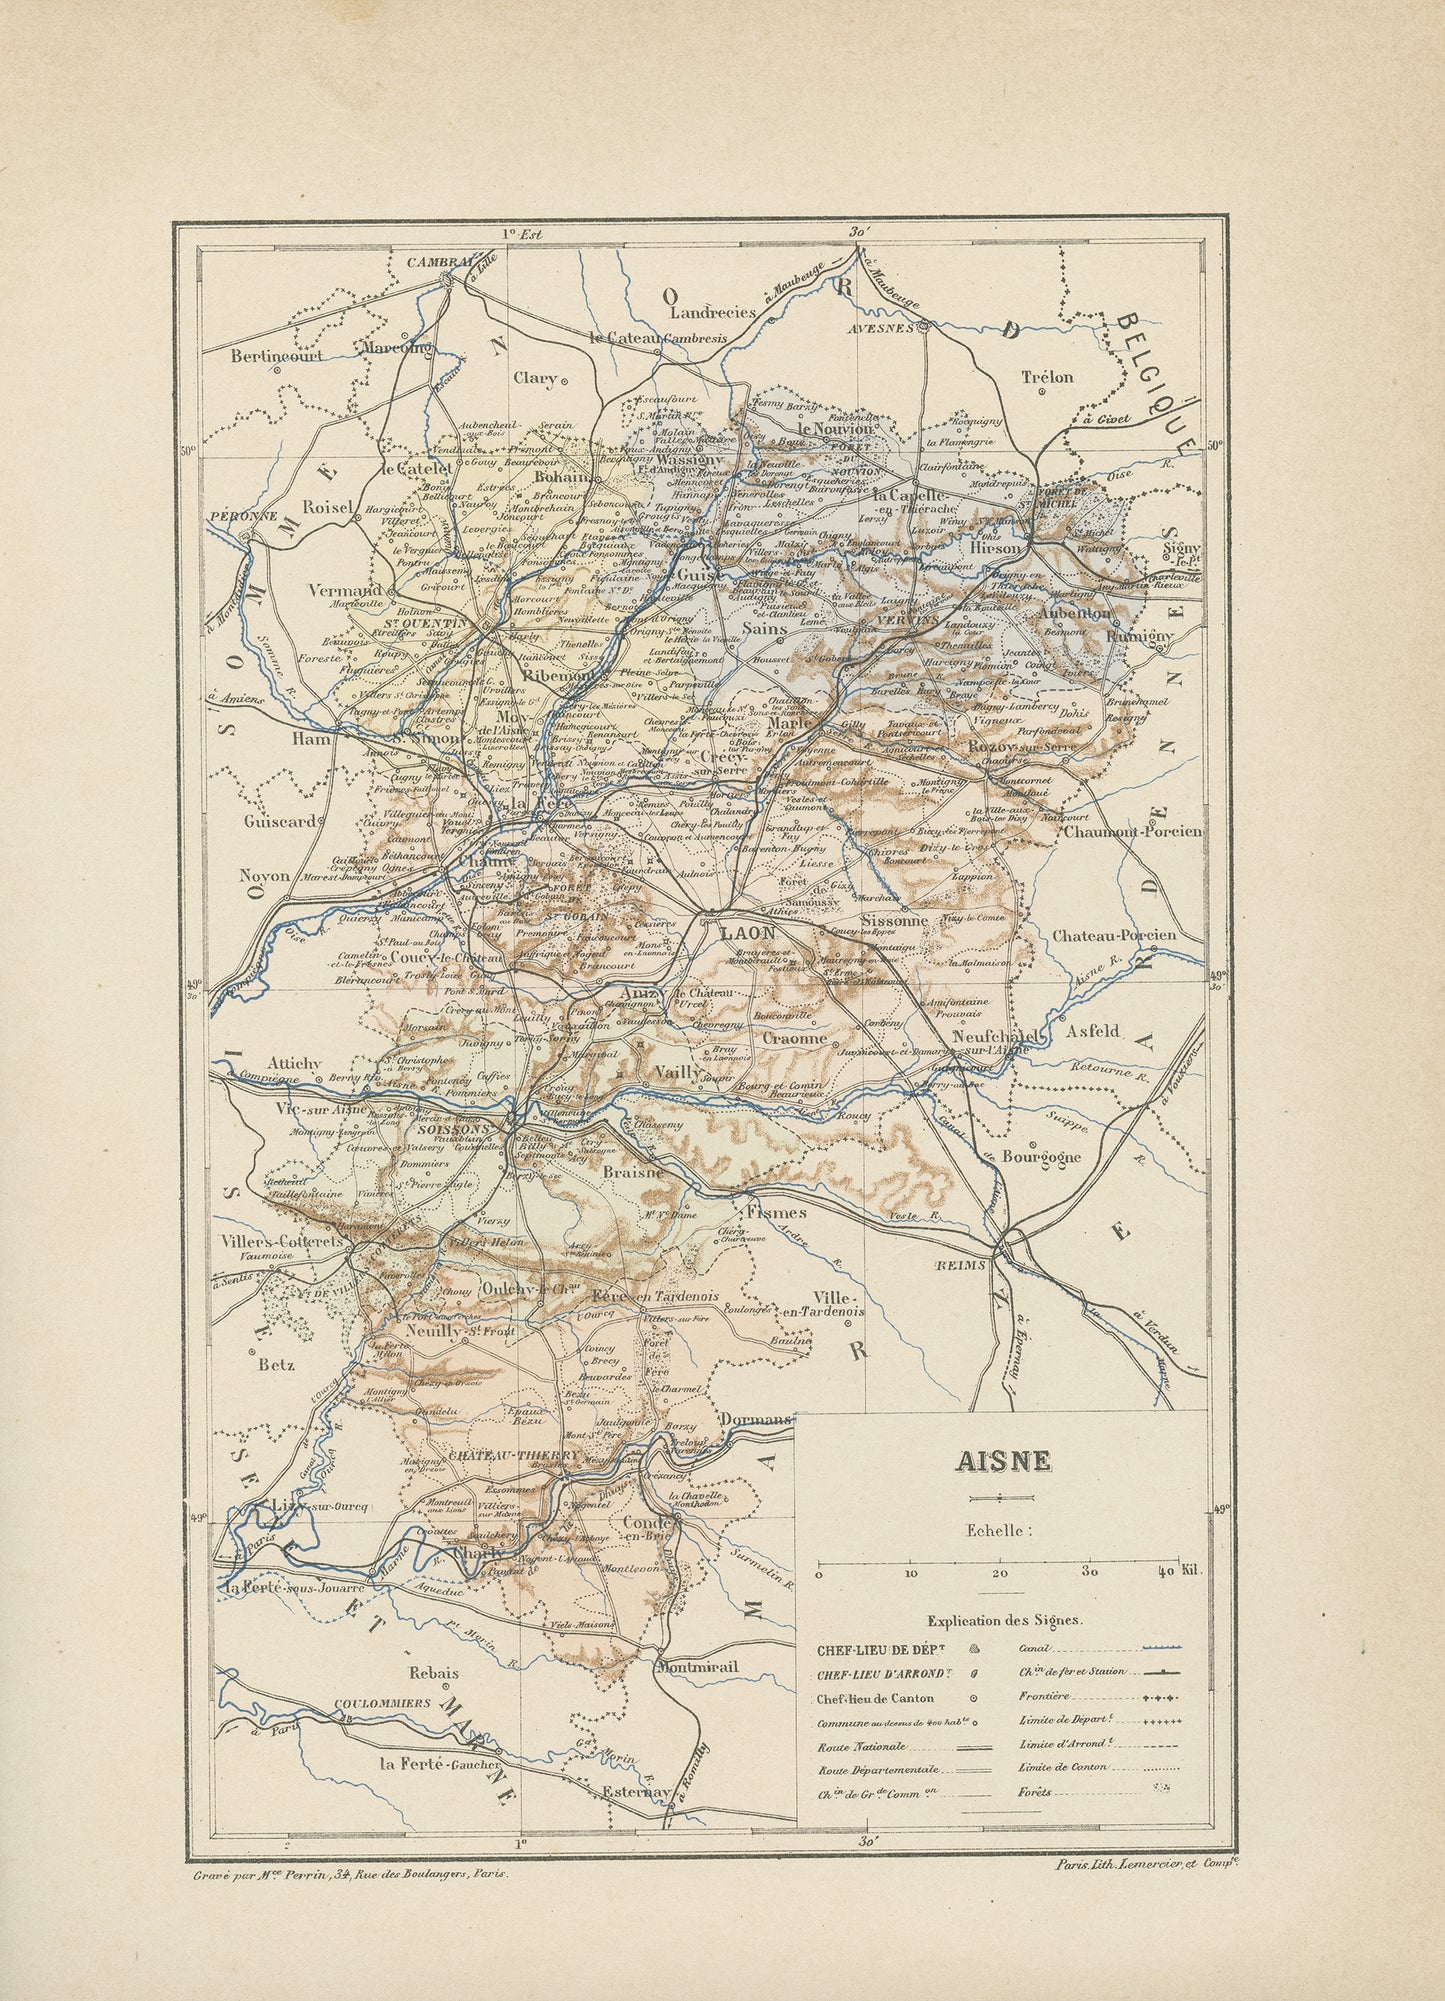 1892 Antique Aisne Map - French department